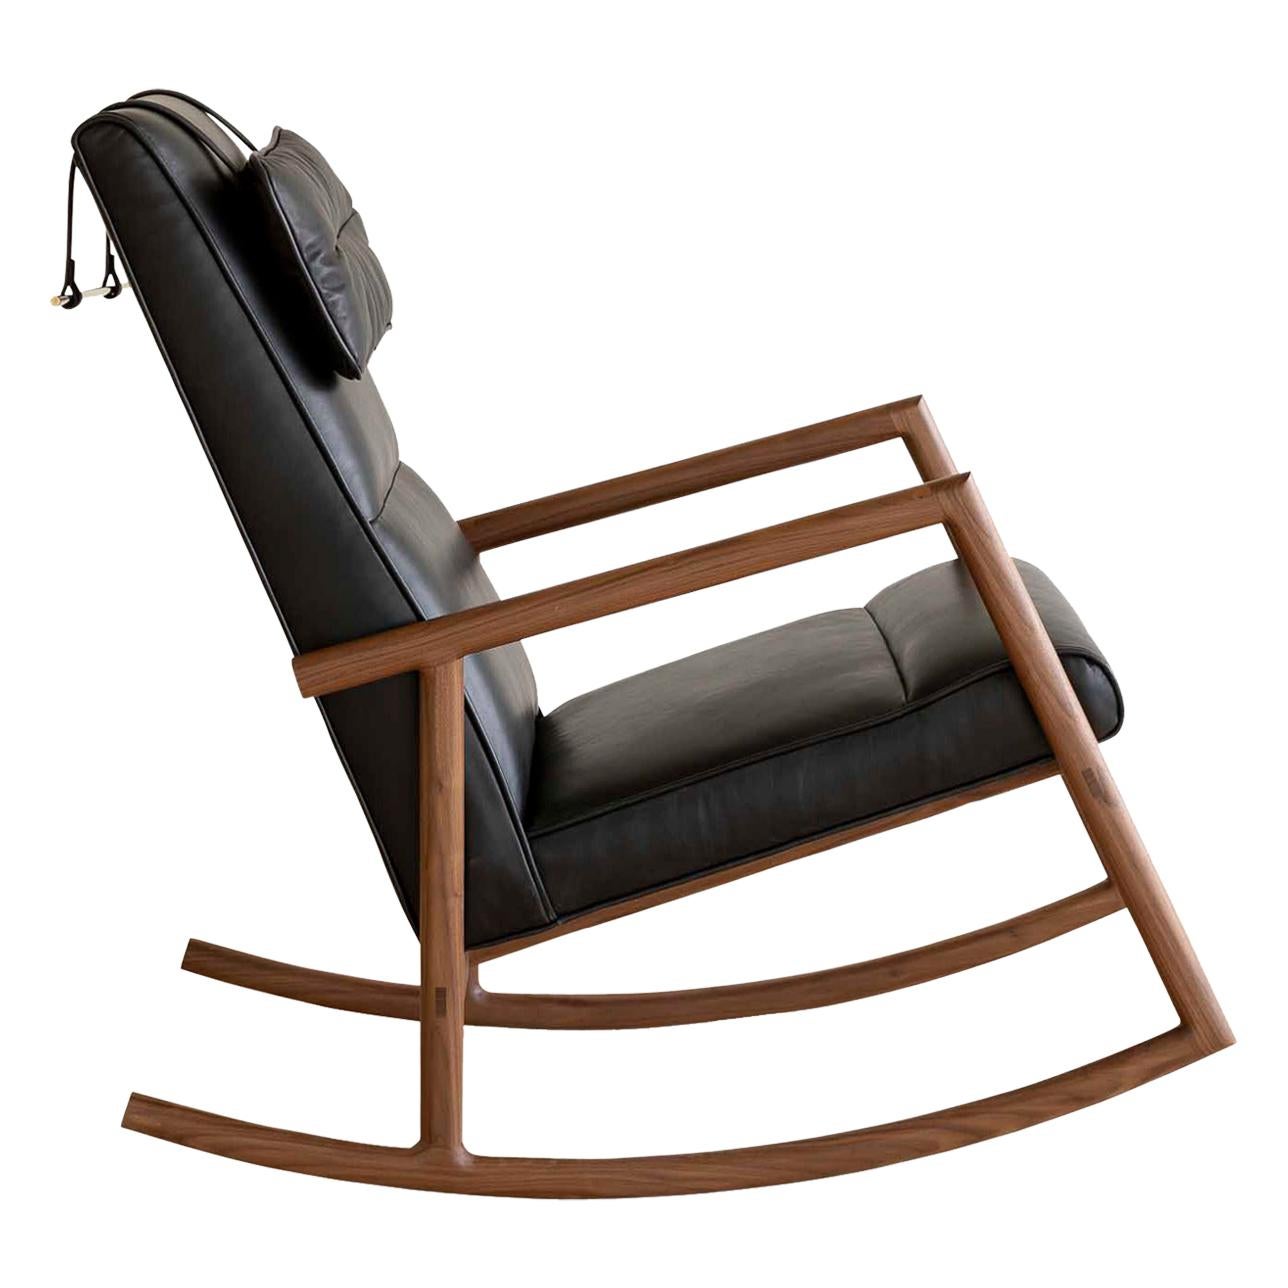 EARL Walnut, Black Leather Moresby Rocking Chair